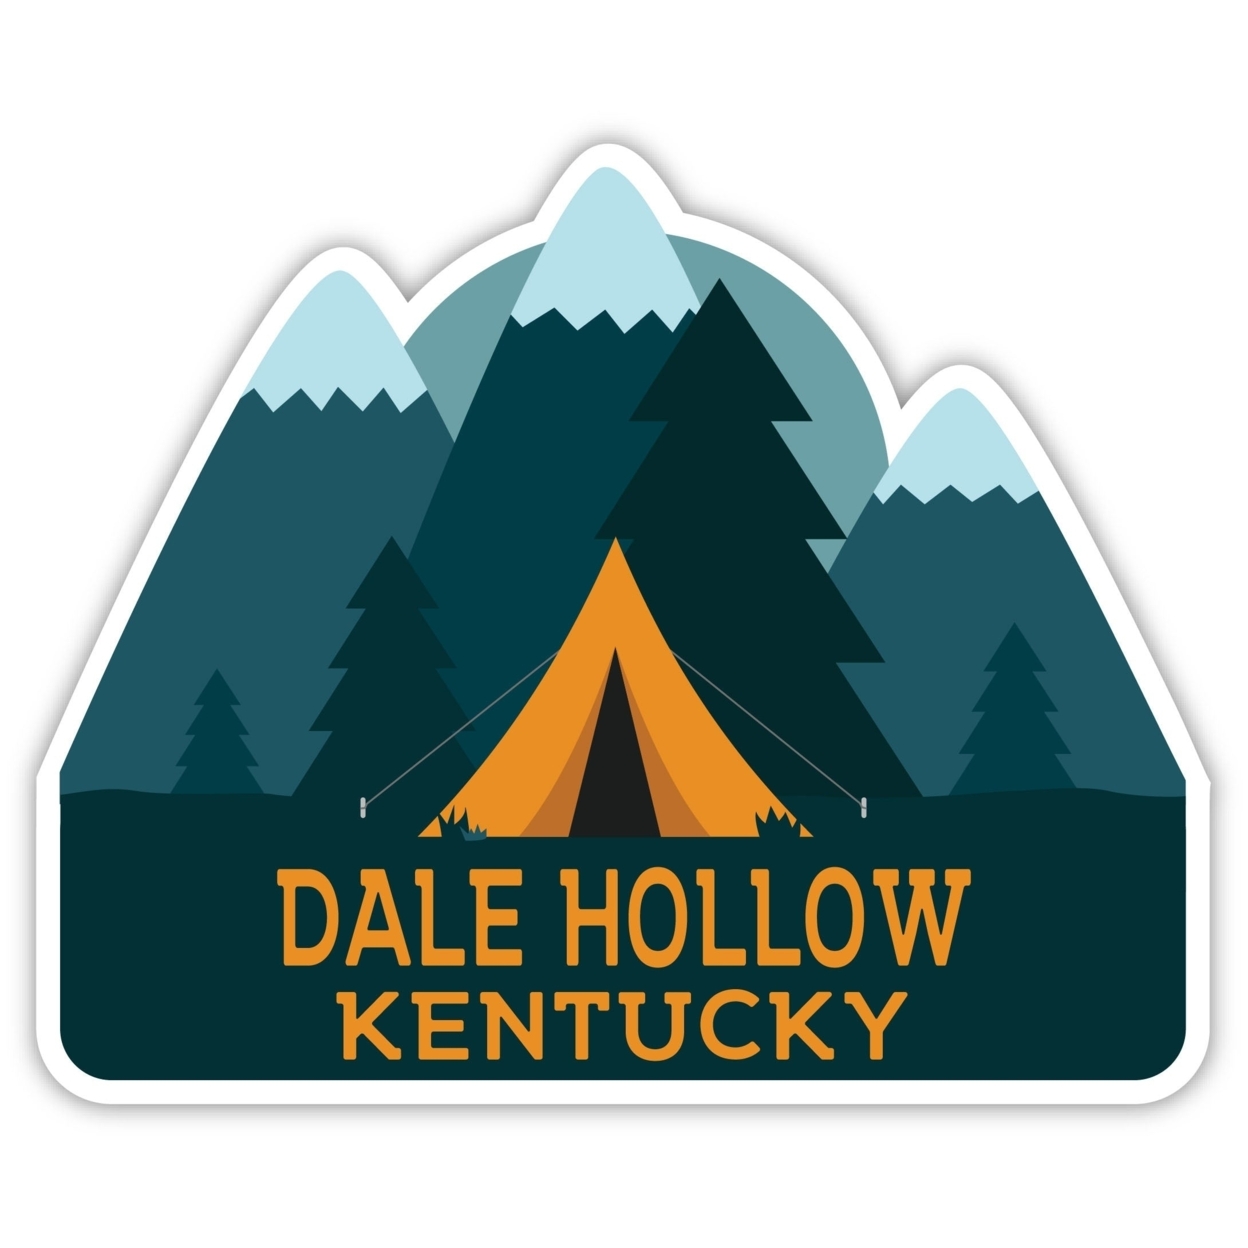 Dale Hollow Kentucky Souvenir Decorative Stickers (Choose Theme And Size) - 4-Pack, 12-Inch, Tent